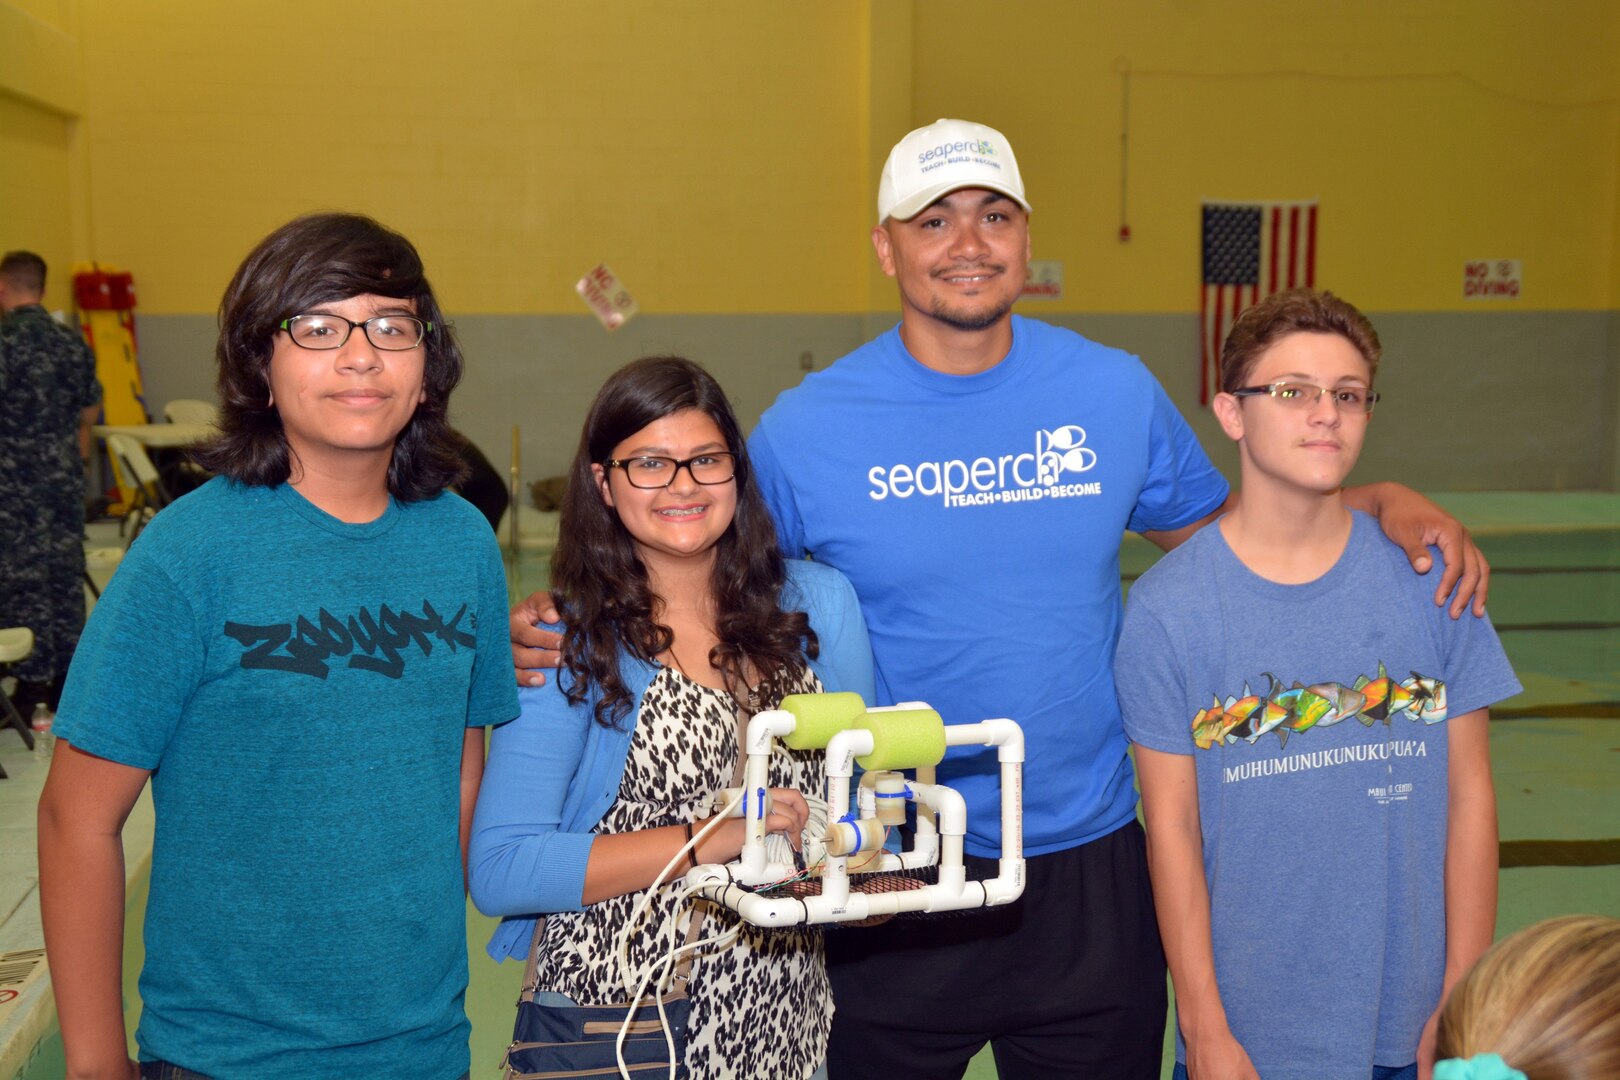 John Munoz, a computer science teacher with Alamo Heights High School and Summer SeaPerch instructor for Northeast Lakeview College, stands with one of the six teams he coached during a SeaPerch scrimmage held at the Eastside Branch Boys & Girls Club July 27. The event was held on the final day of the SeaPerch Regional Challenge Prep Camp hosted by Northeast Lakeview College and the Boys & Girls Clubs of San Antonio, in cooperation with Navy City Outreach Southwest Region and Navy Recruiting District (NRD) San Antonio. The scrimmage consisted of the Speed Obstacle and Challenge Courses. 